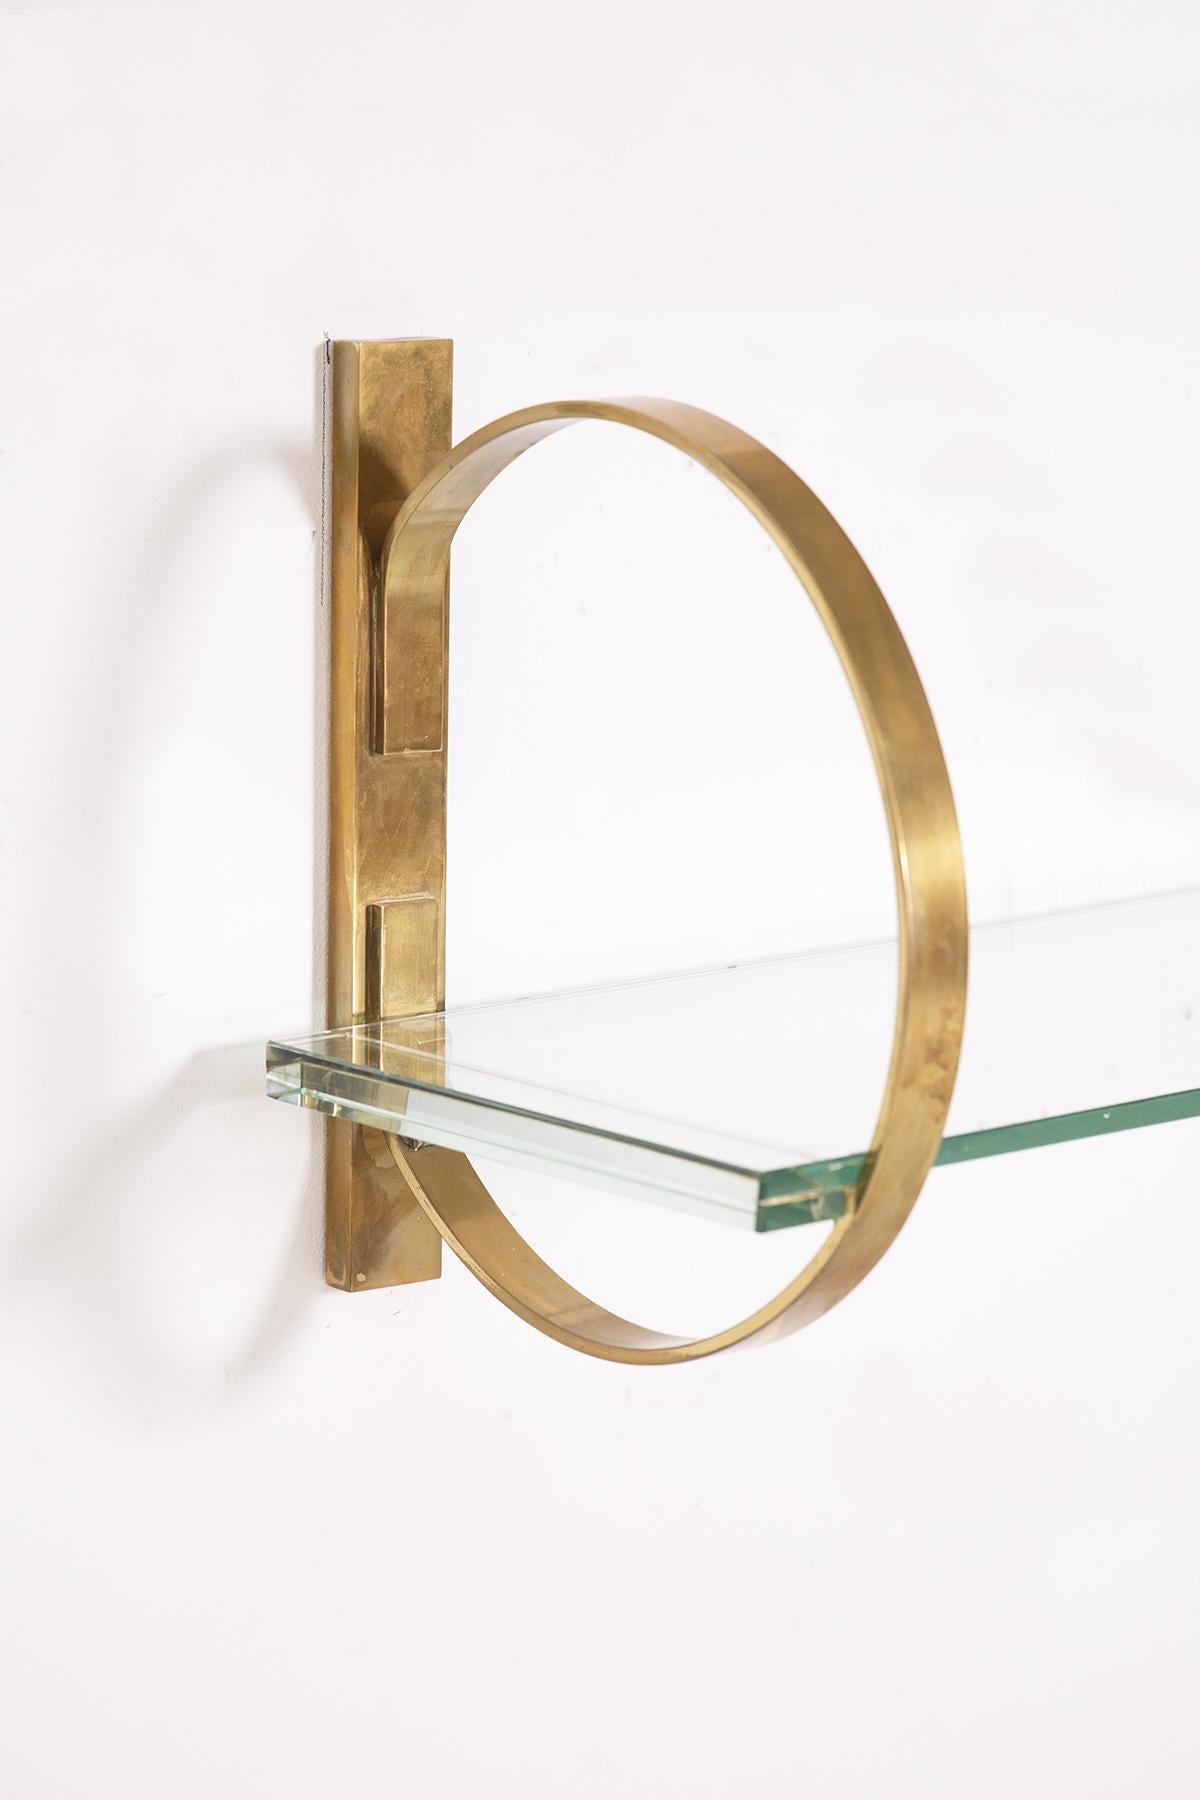 Italian hanging console table from the 1960s. The console is made with a thick glass top of the period, transparent in colour tending to green.
The glass top is supported by two circular brass brackets, anchored to the wall. The brass has a